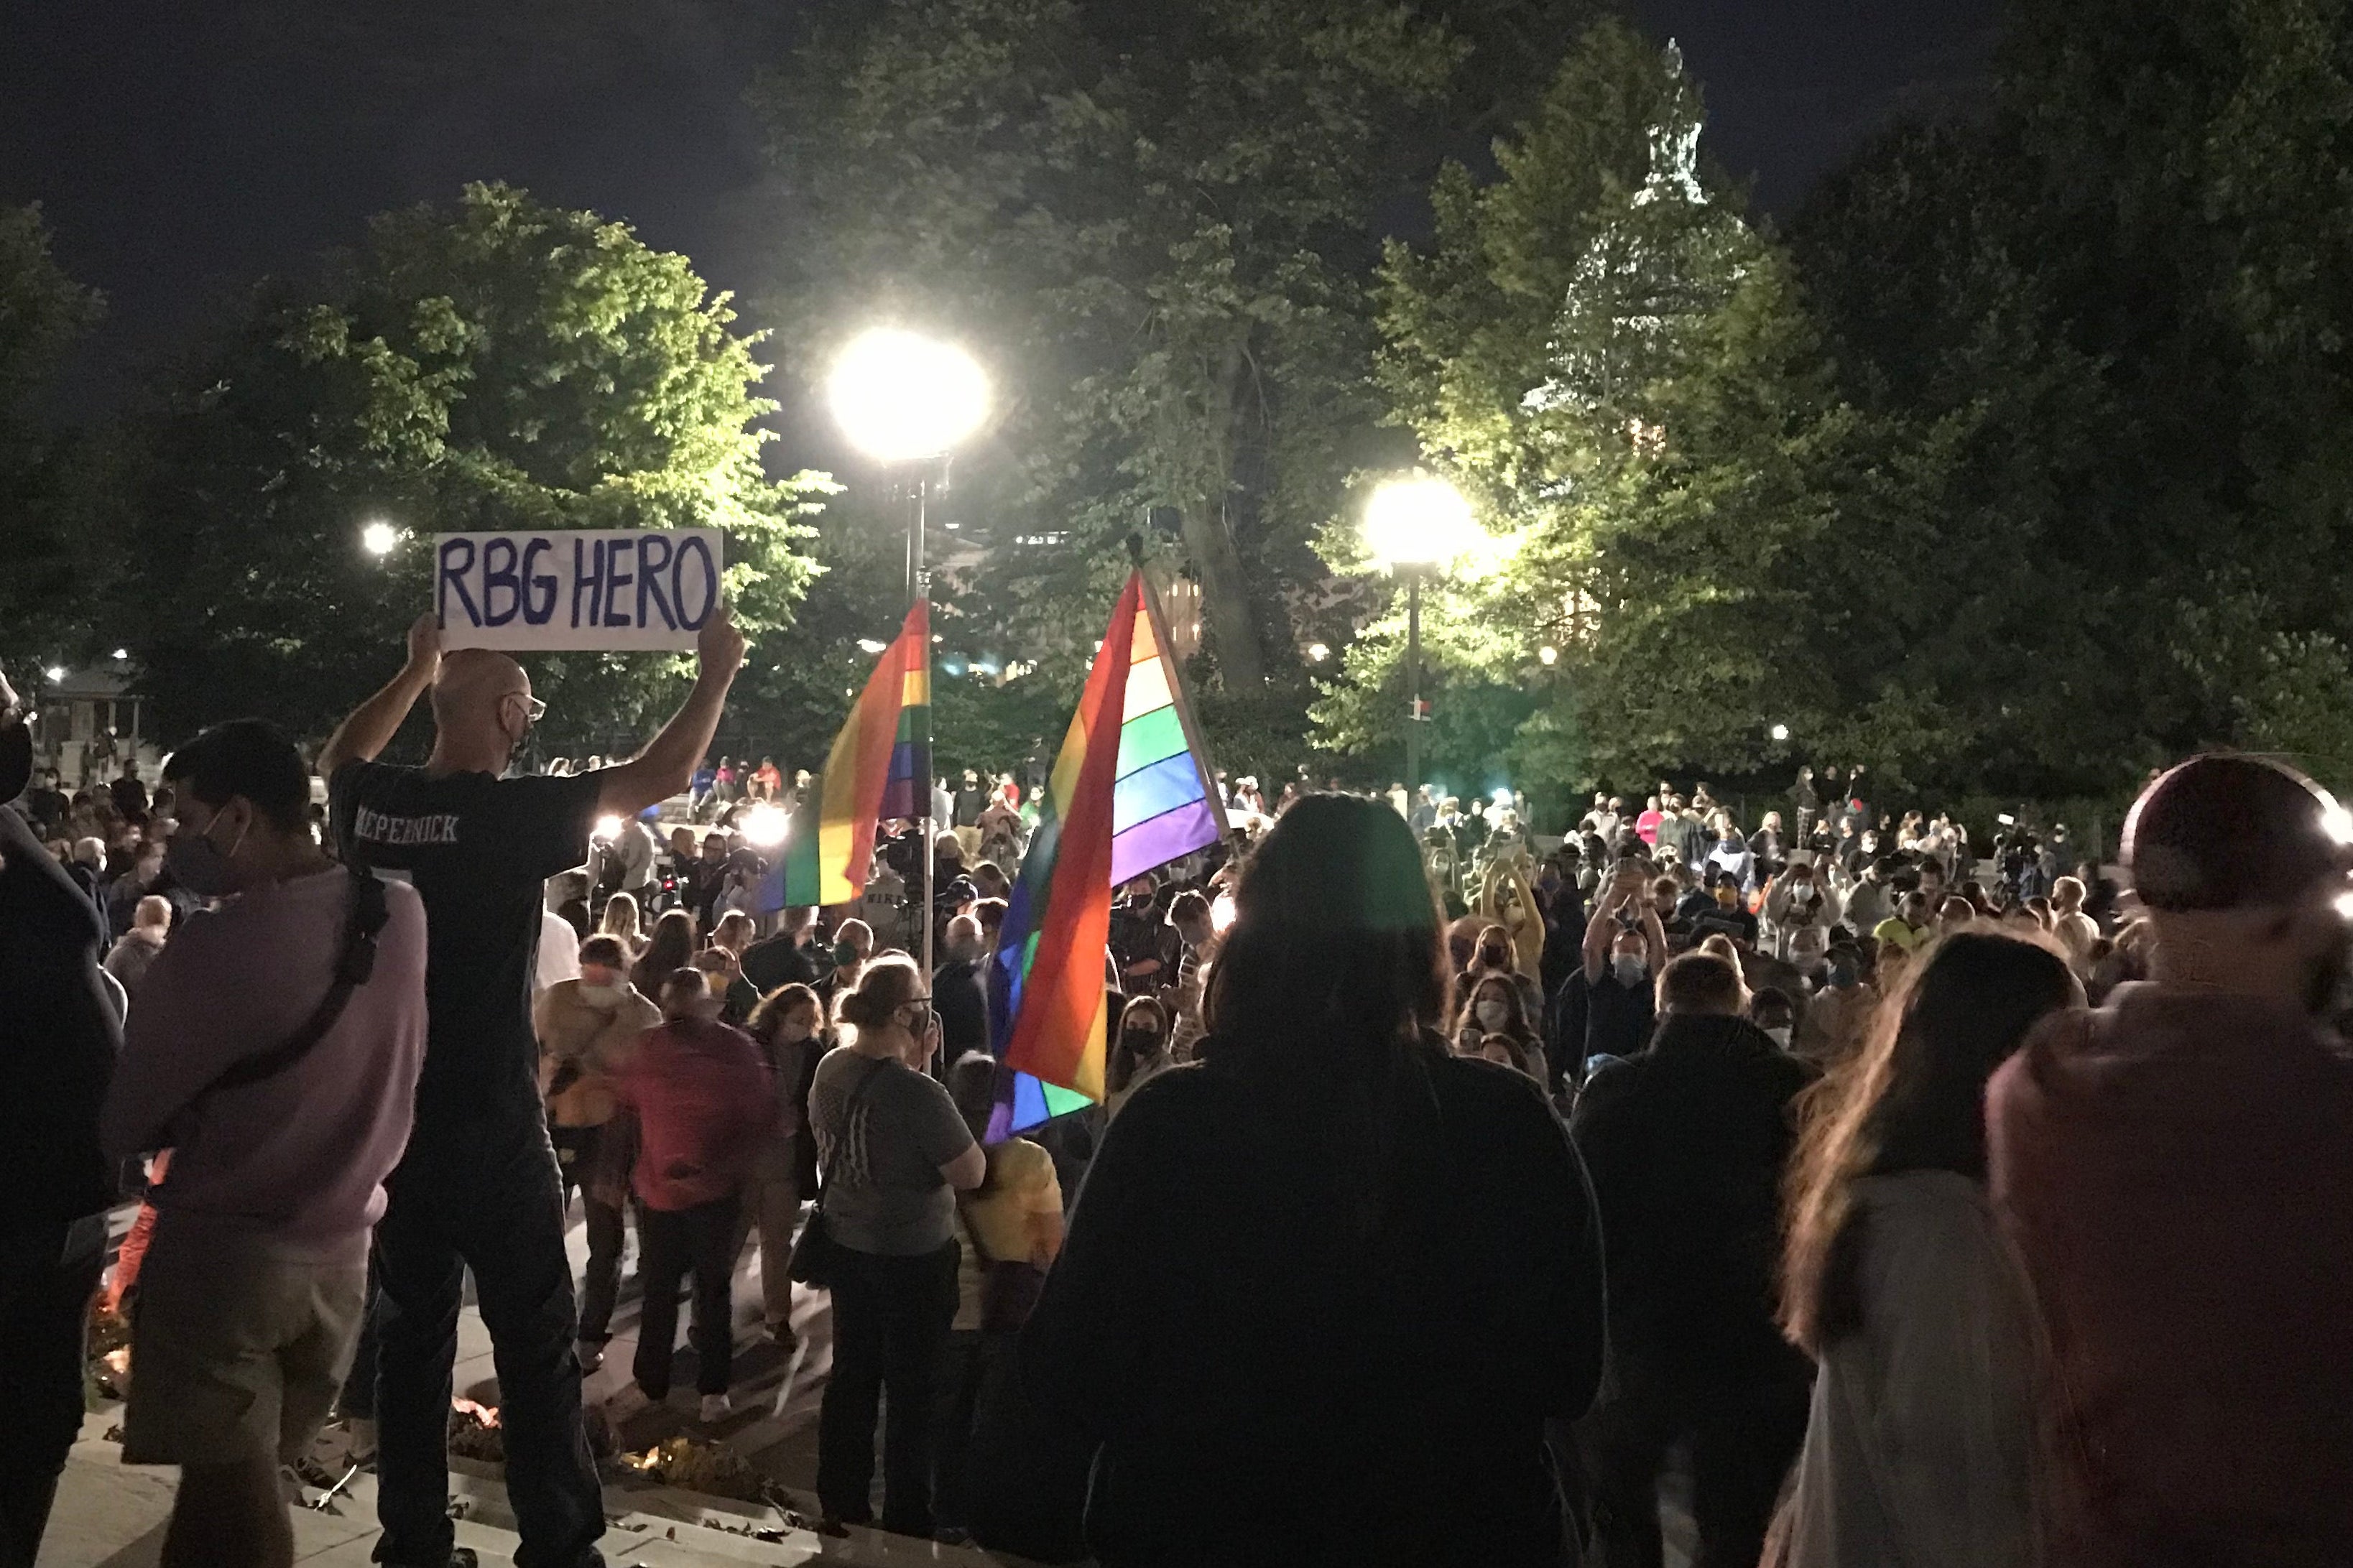 A man holds a sign reading "RBG Hero" amid a large crowd with waving rainbow flags and the Capitol in the background.